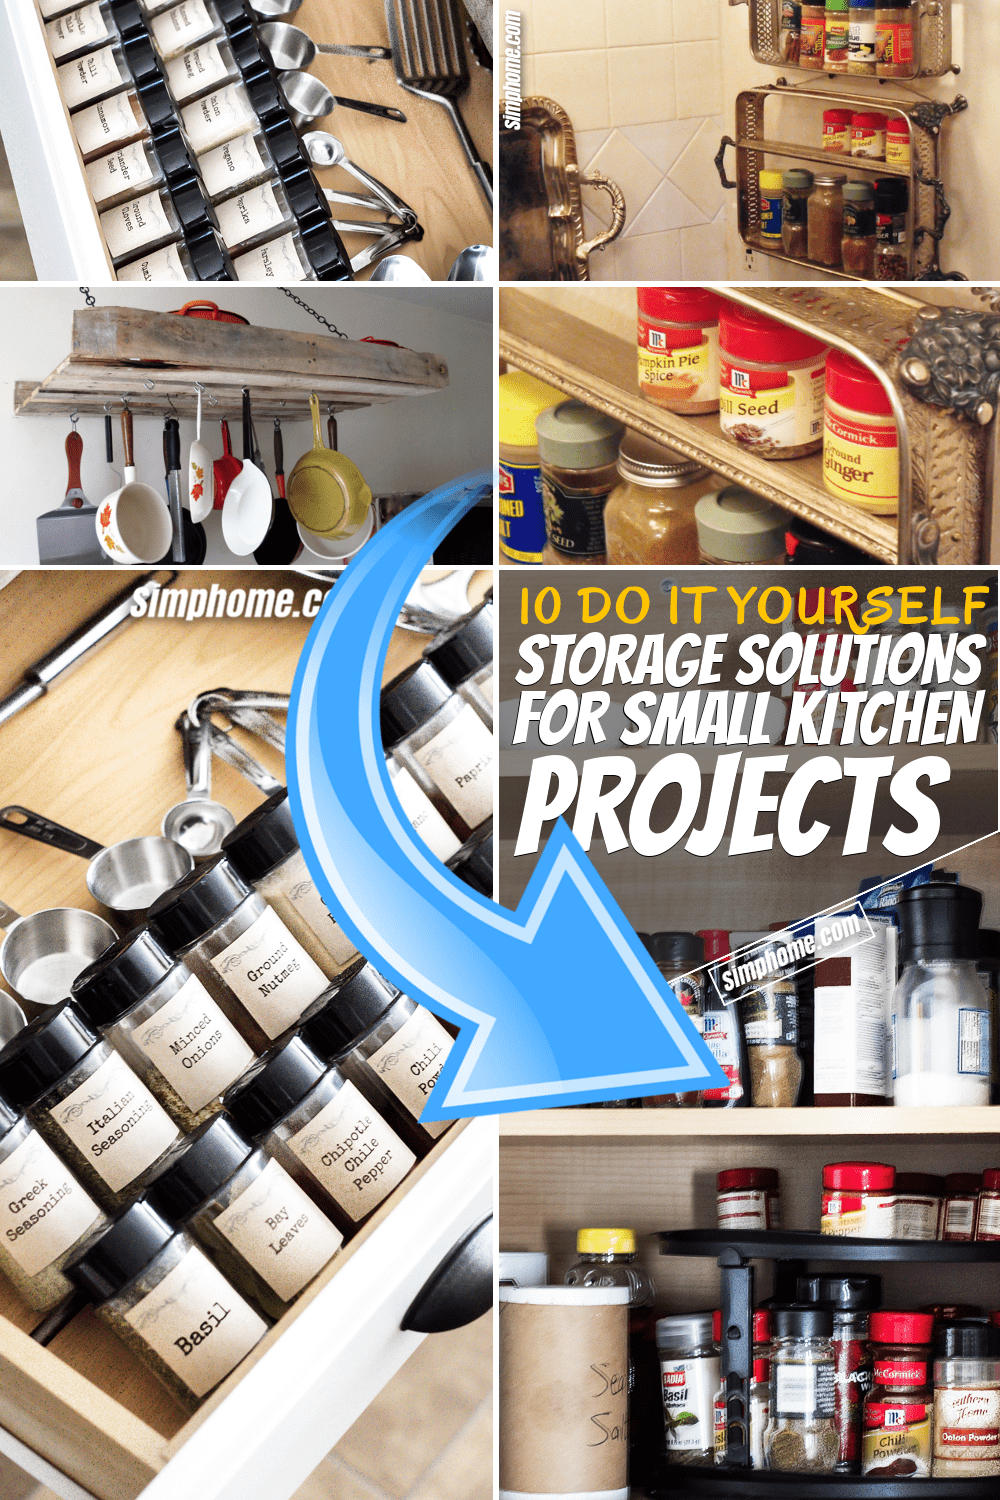 Simphome.com 10 DIY Storage Solution Projects for Small Kitchens Pinterest Featured Image